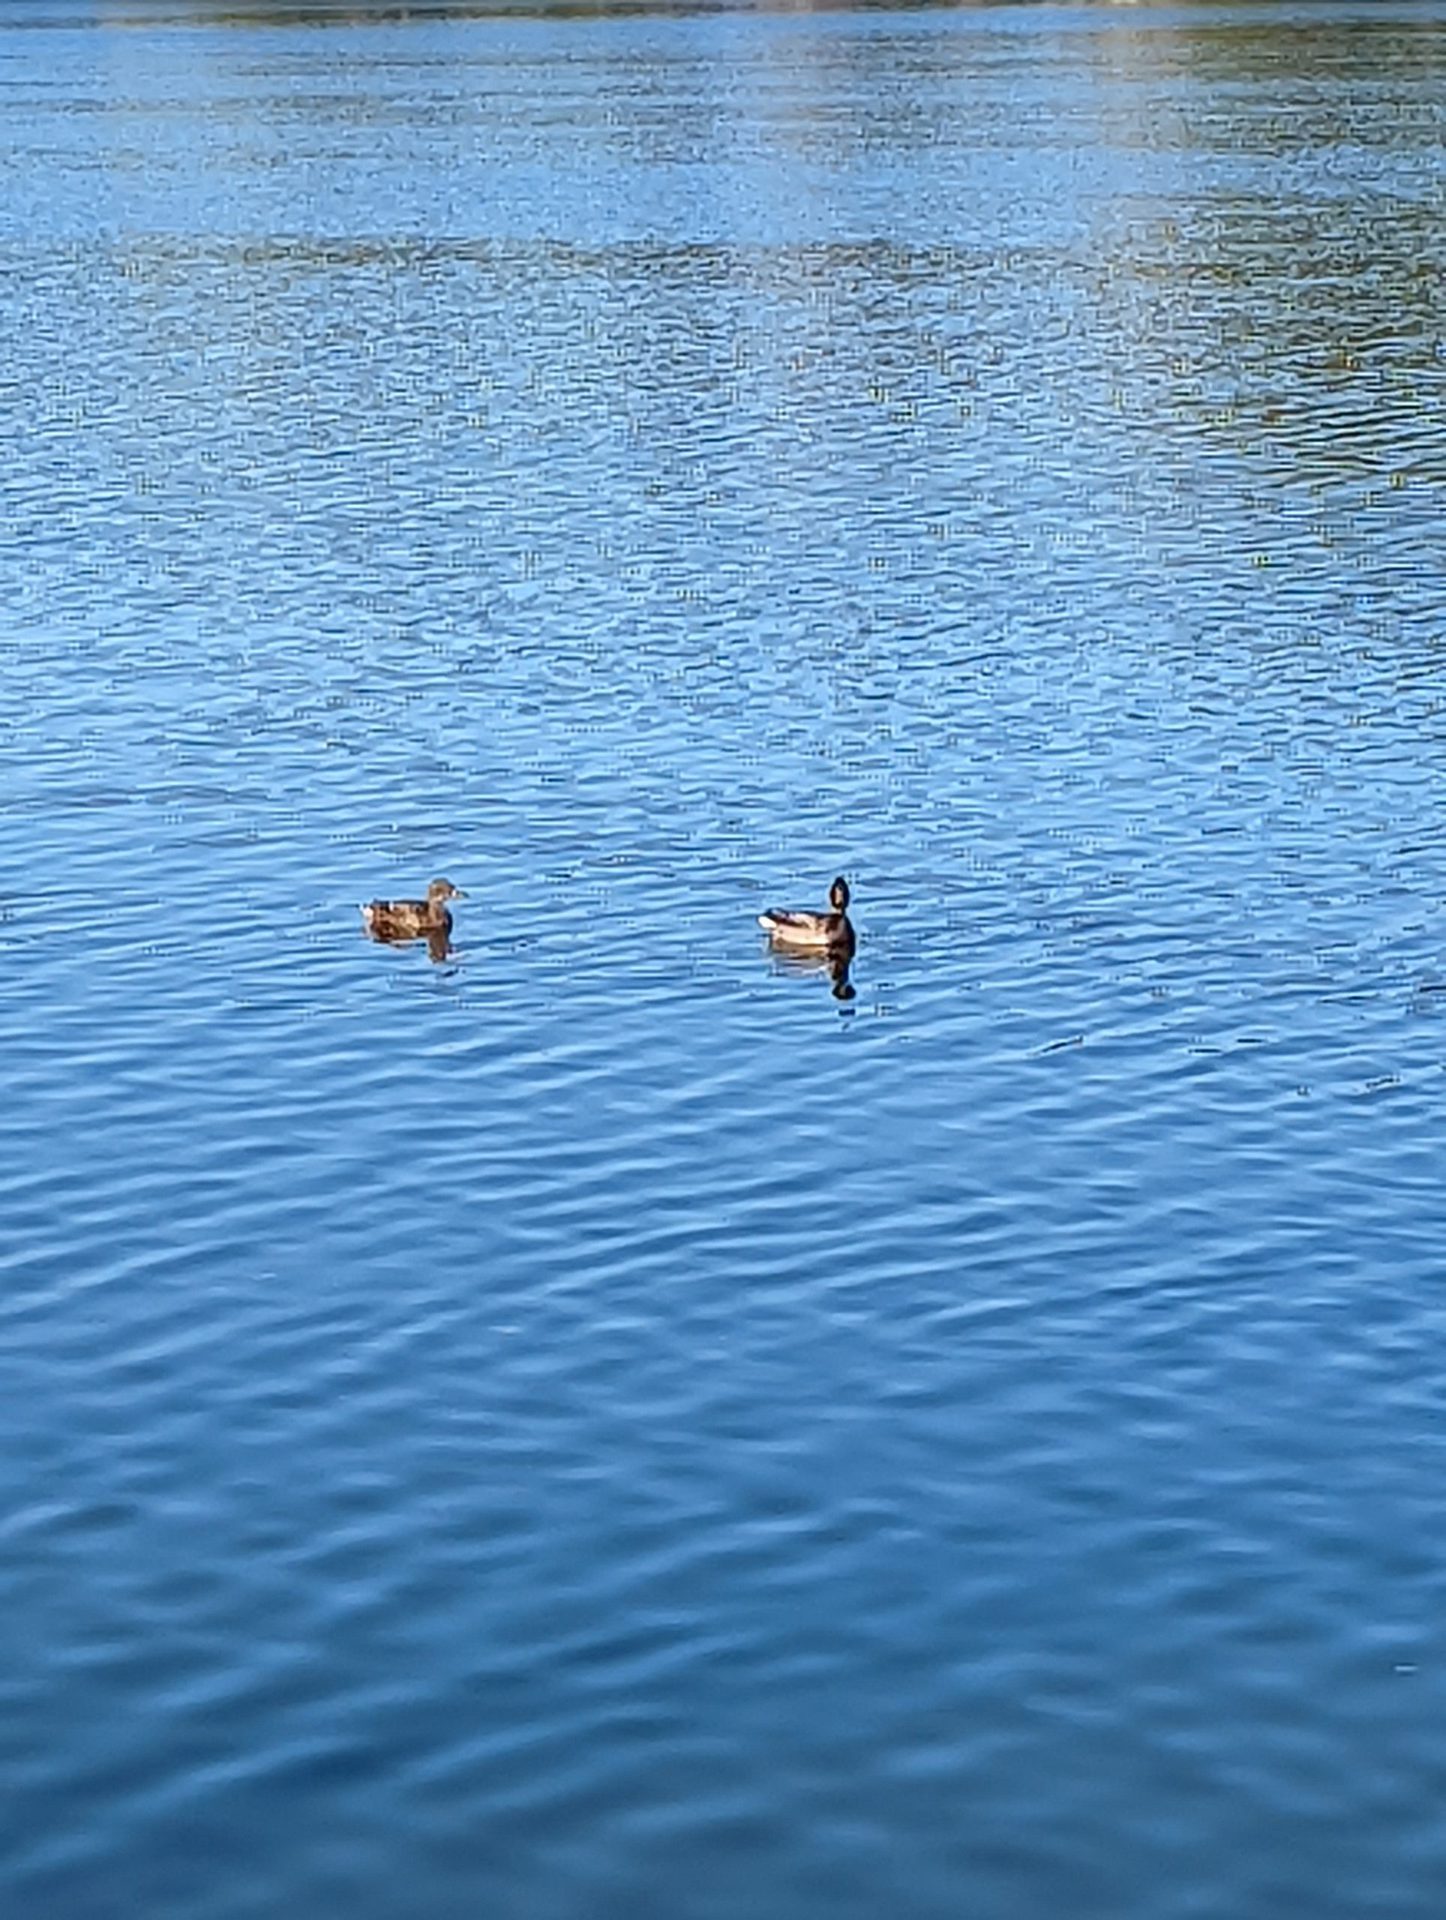 An image of a river with ducks taken with the Google Pixel 6 camera